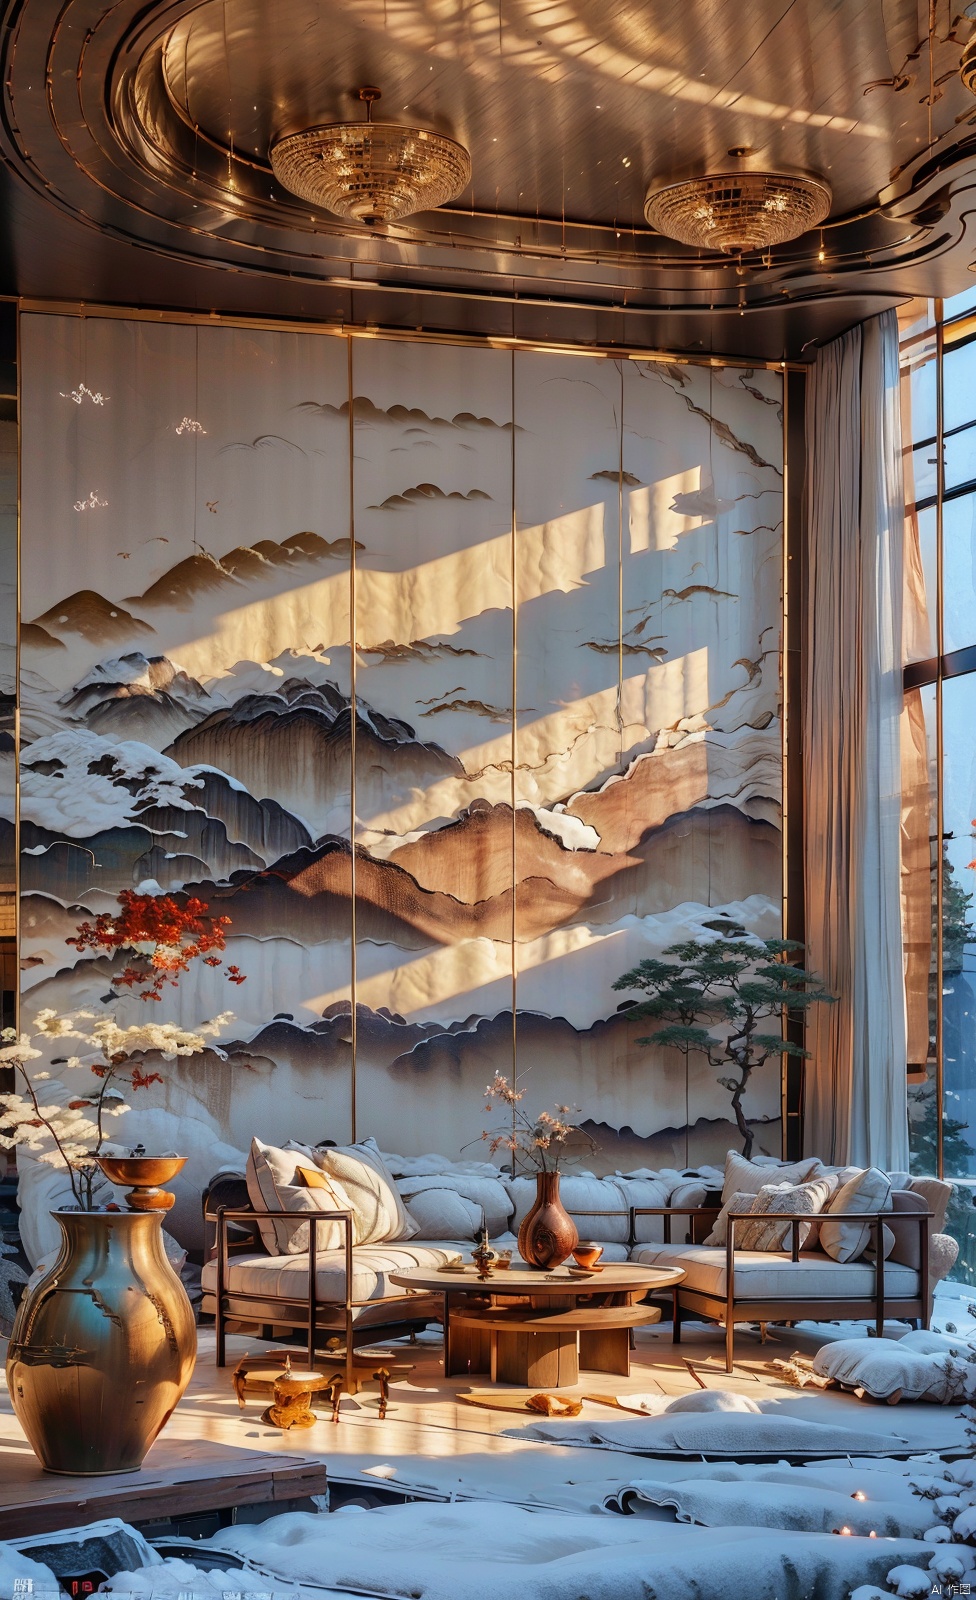  Dream homes, modernist style, bed, pillows, flowers, vase, table, sofa, books, flower pots, ornate ceiling lamp, table lamp, chair, curtains,panoramic glass window with snow-covered mountains outside, morning sunlight pouring through the window onto the floor, shadows, Lao Chen, Rock buildings